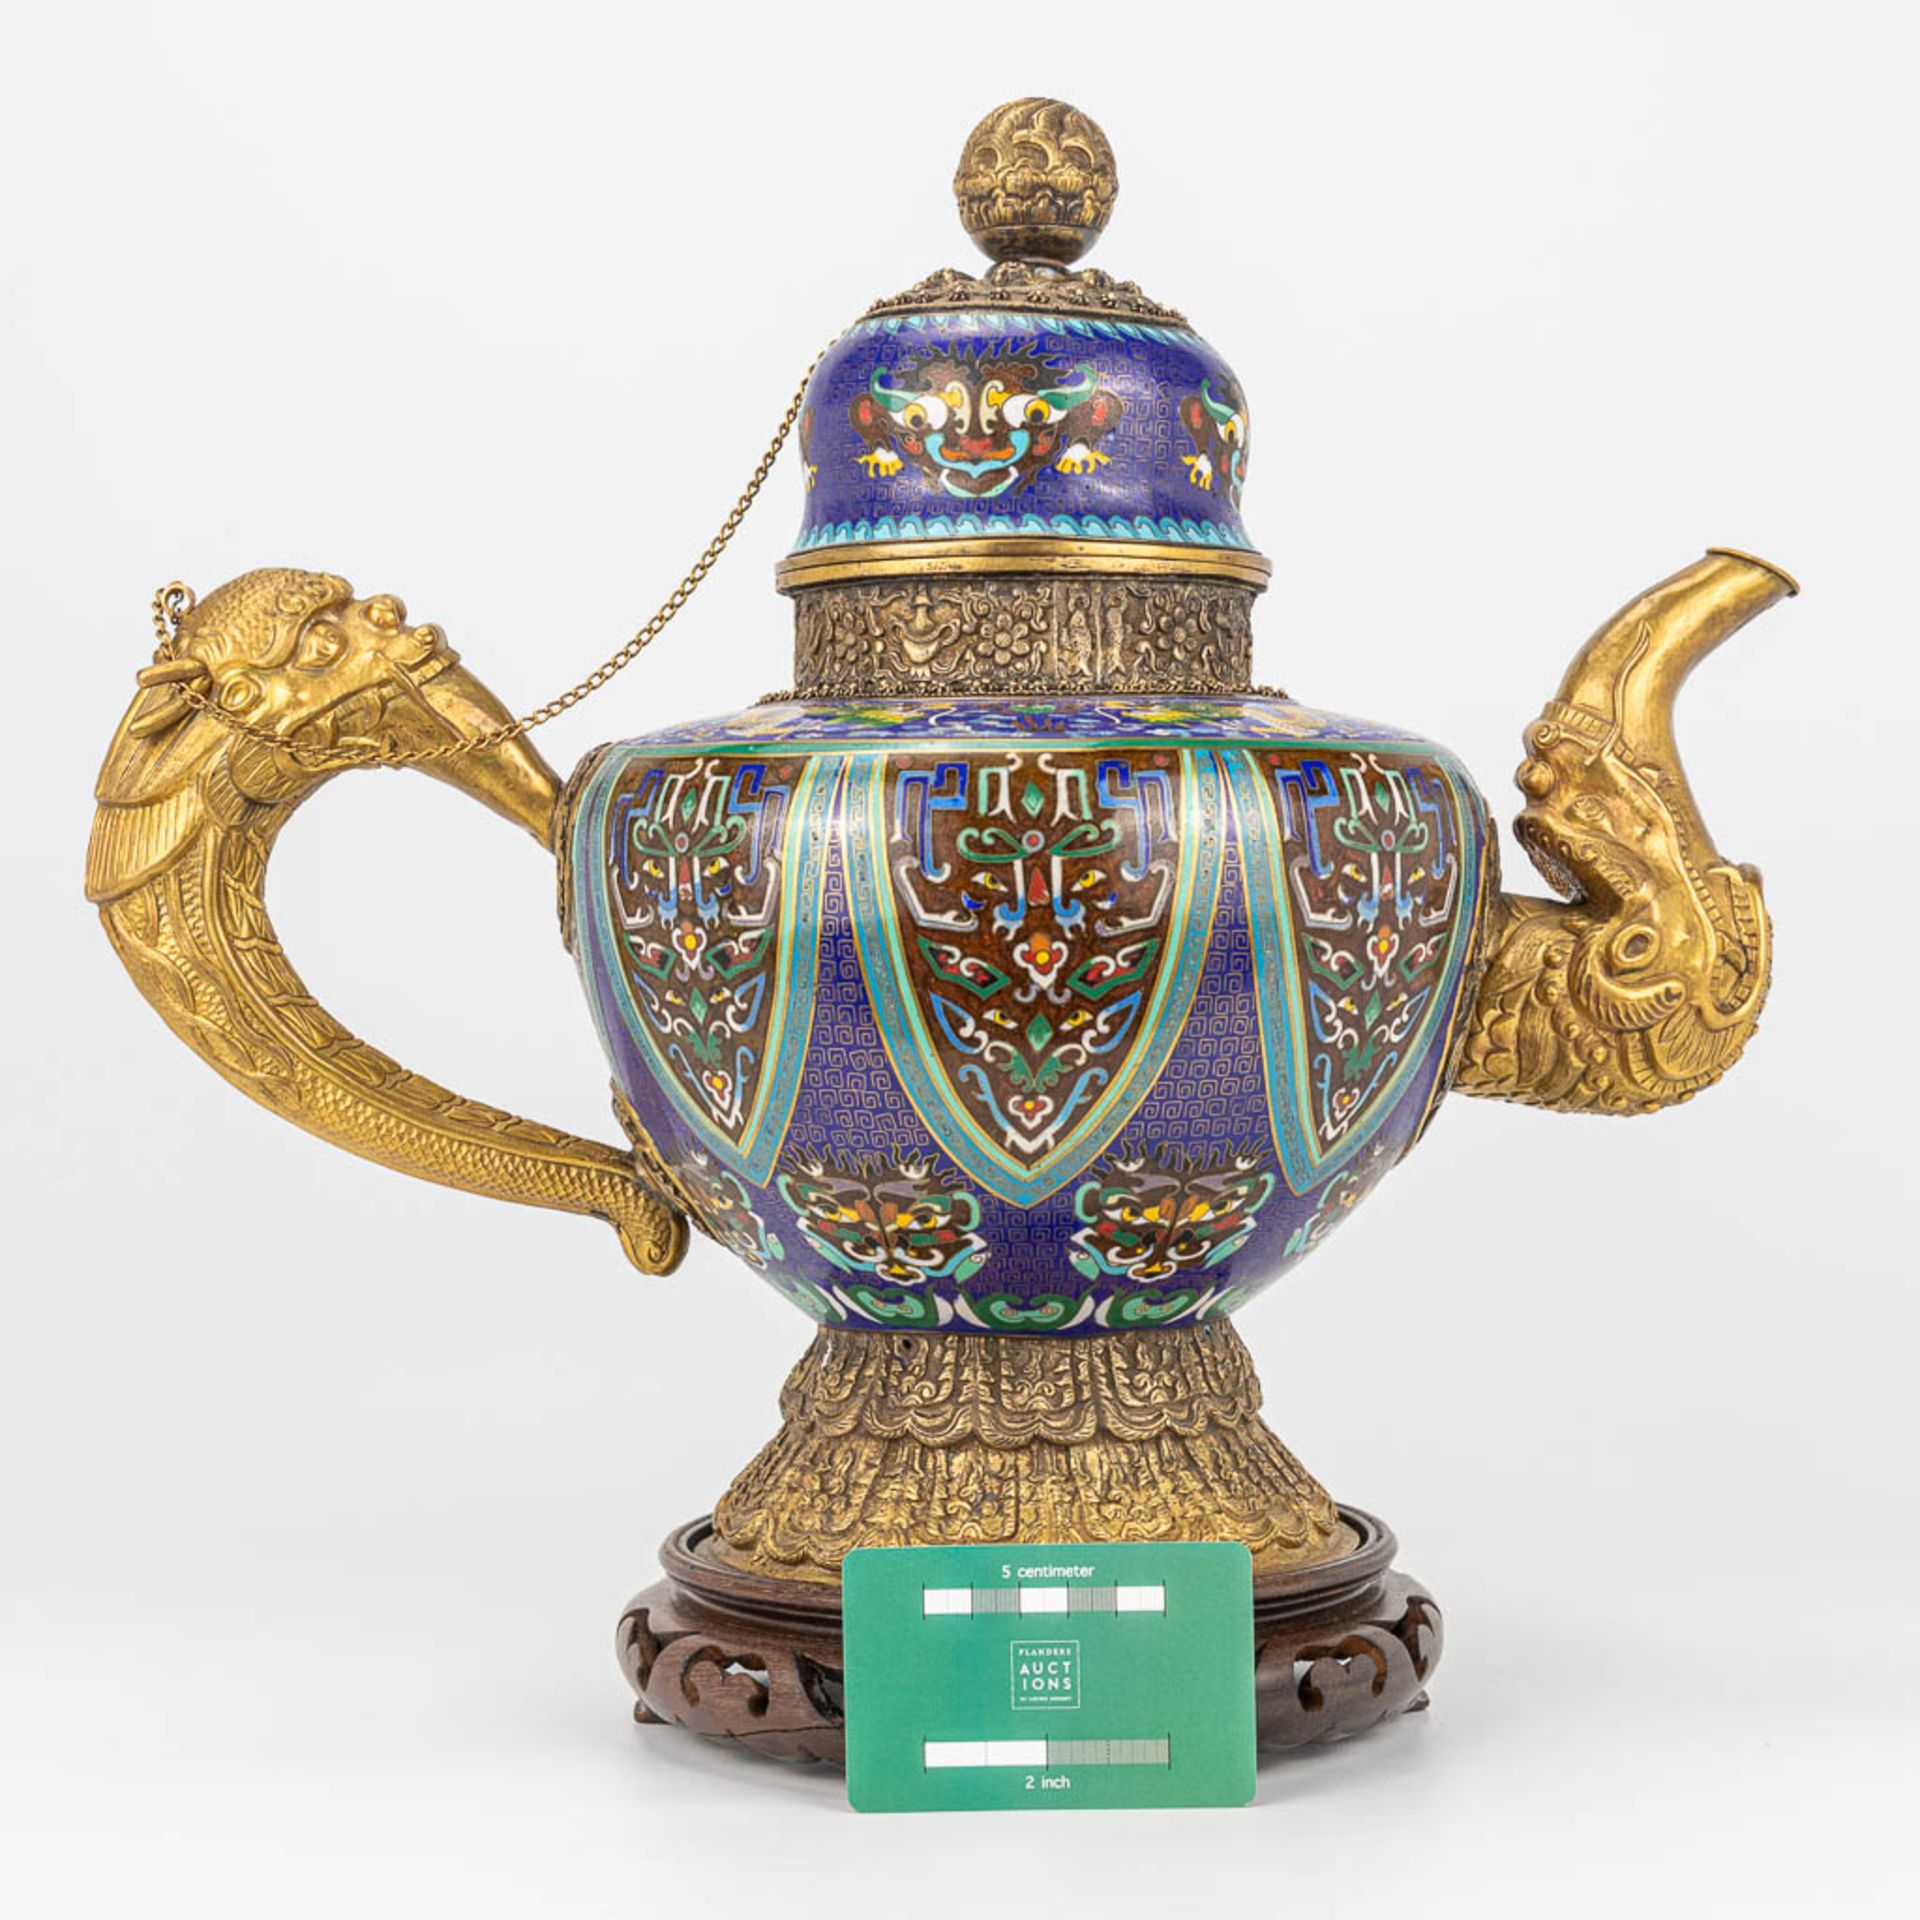 A Tibetan ceremonial ewer made of gilt bronze and finished with cloisonnŽ bronze. - Image 8 of 18